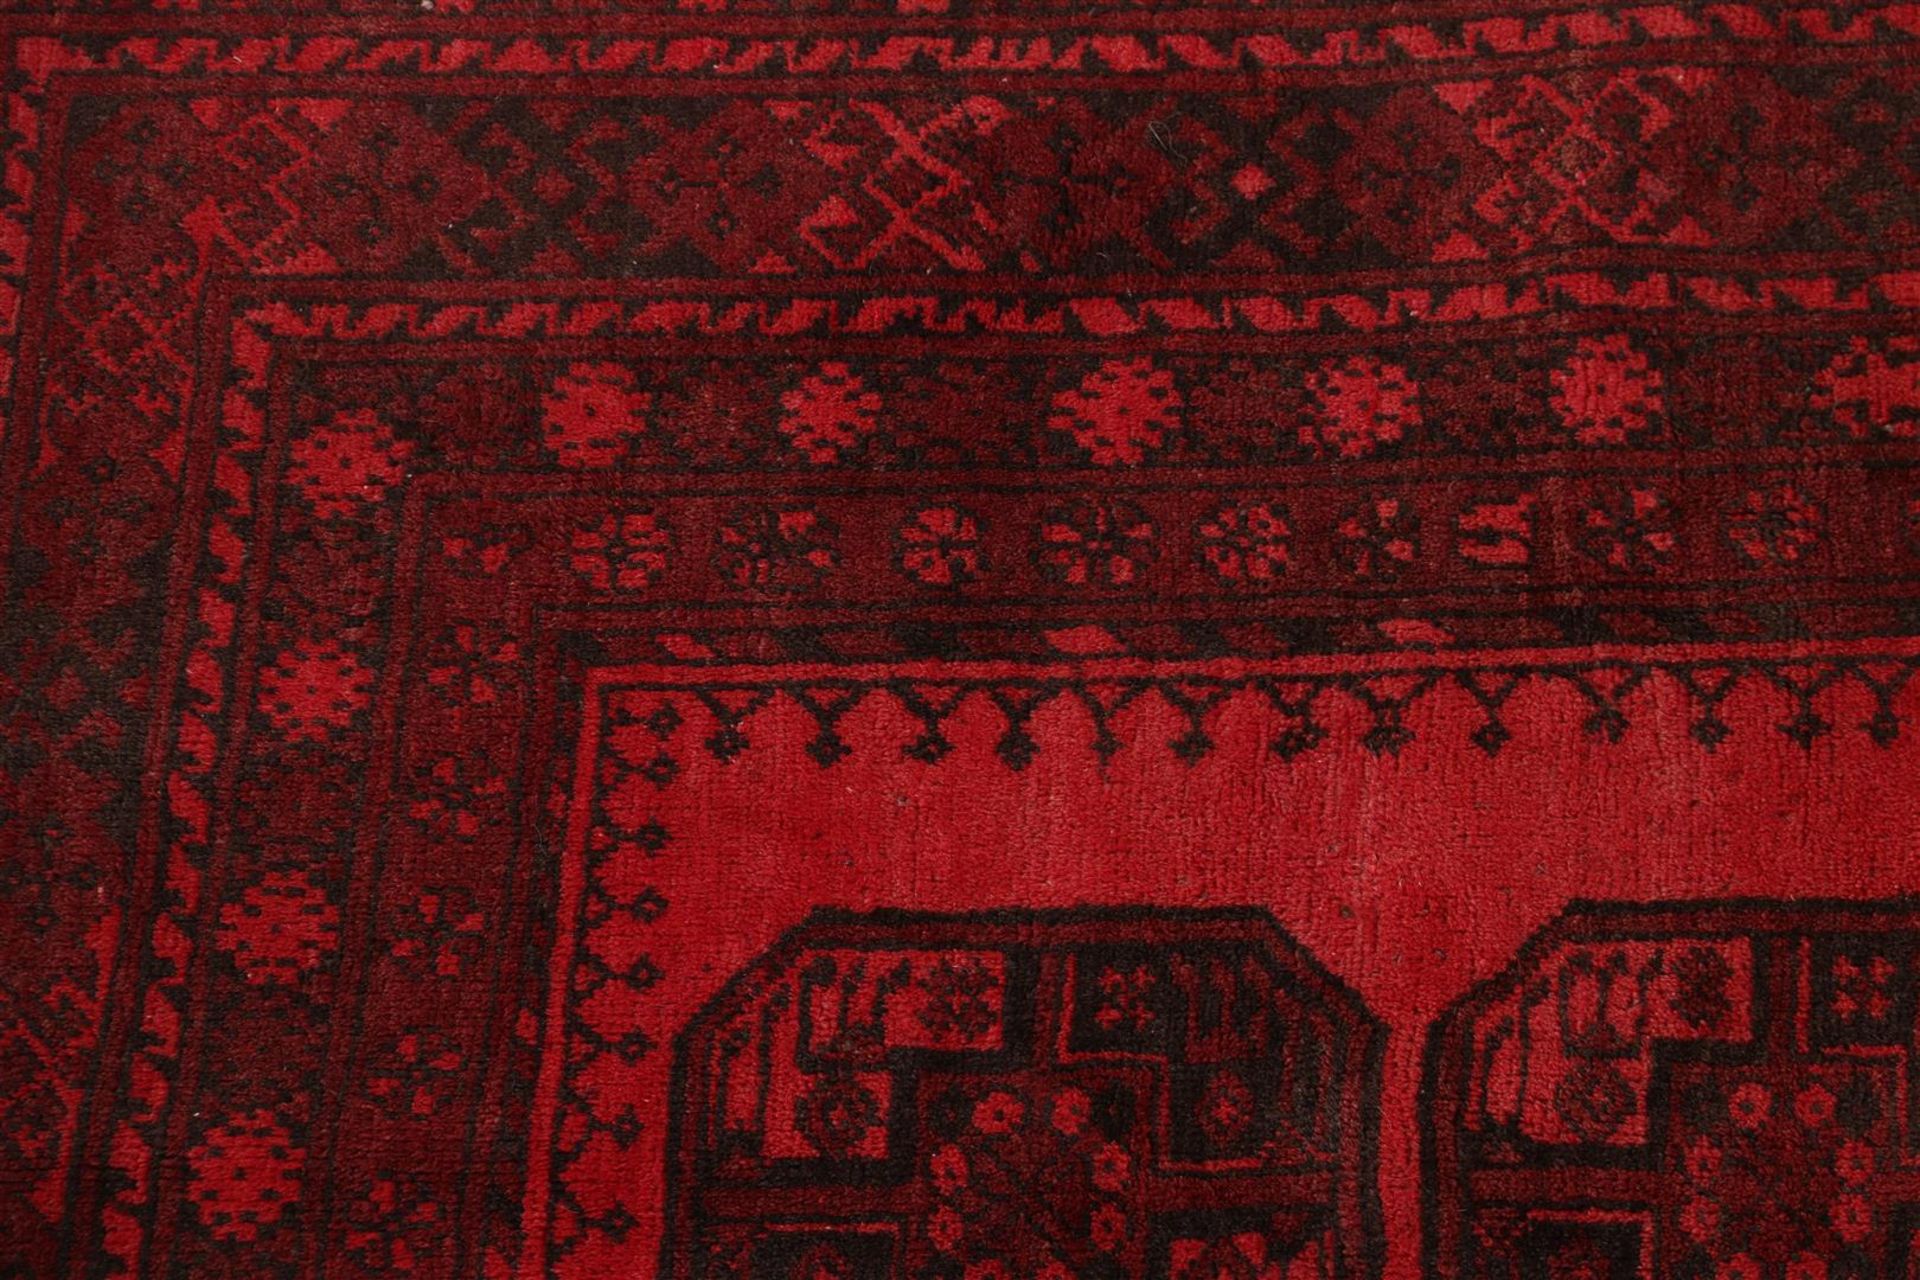 Hand-knotted oriental carpet, Pakistan - Image 3 of 4